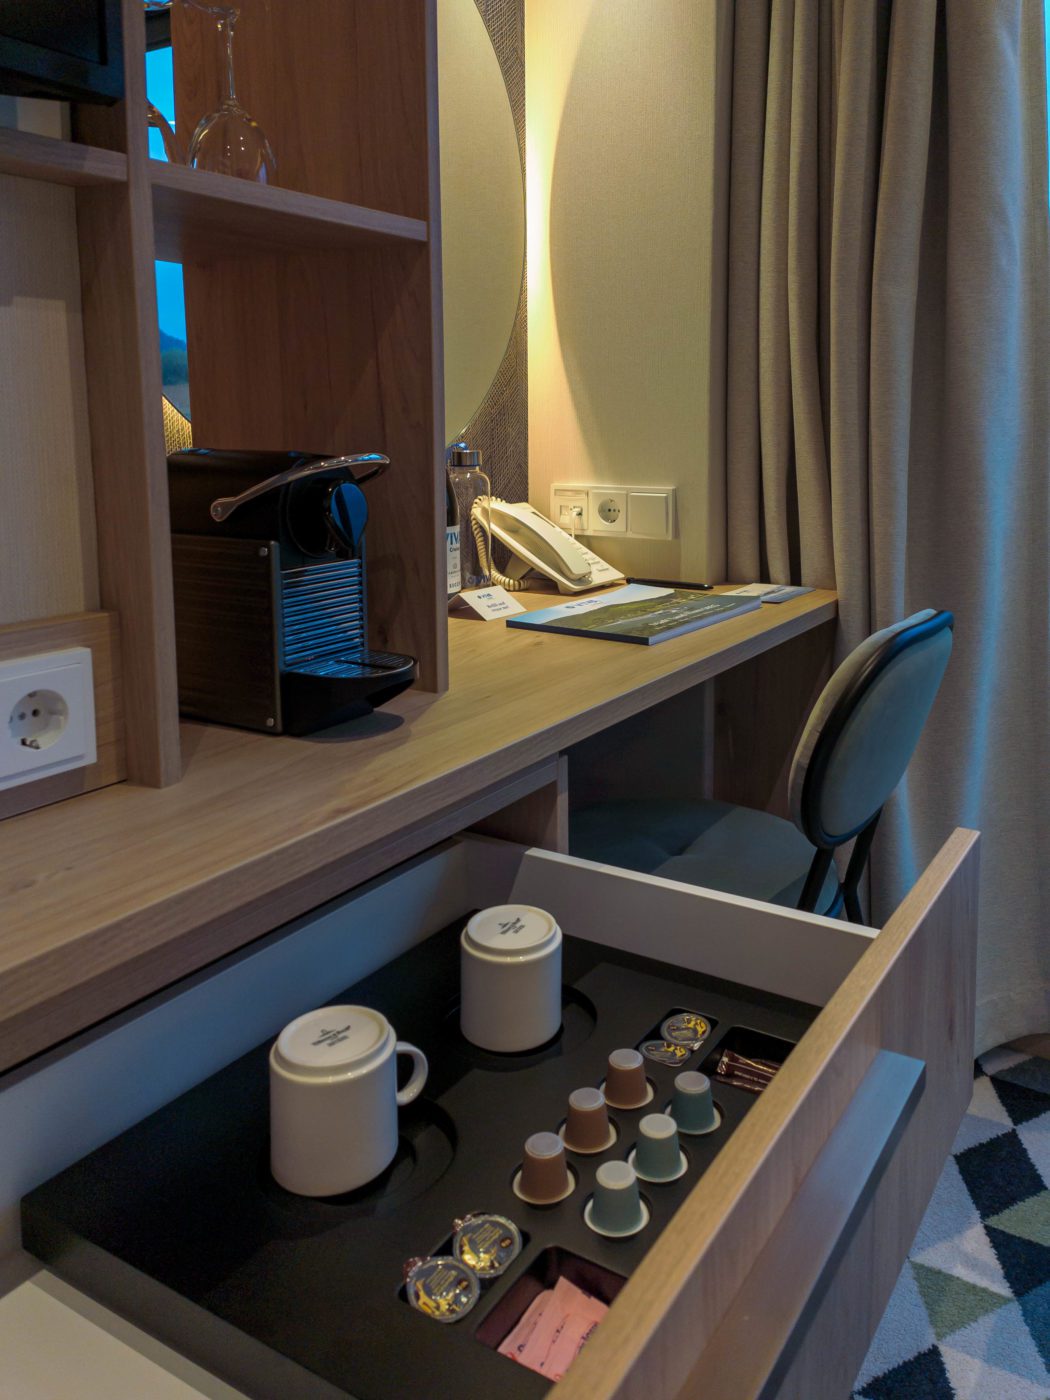 Coffee making facilities in the room of river cruise ship ms Viva One from Viva Cruises